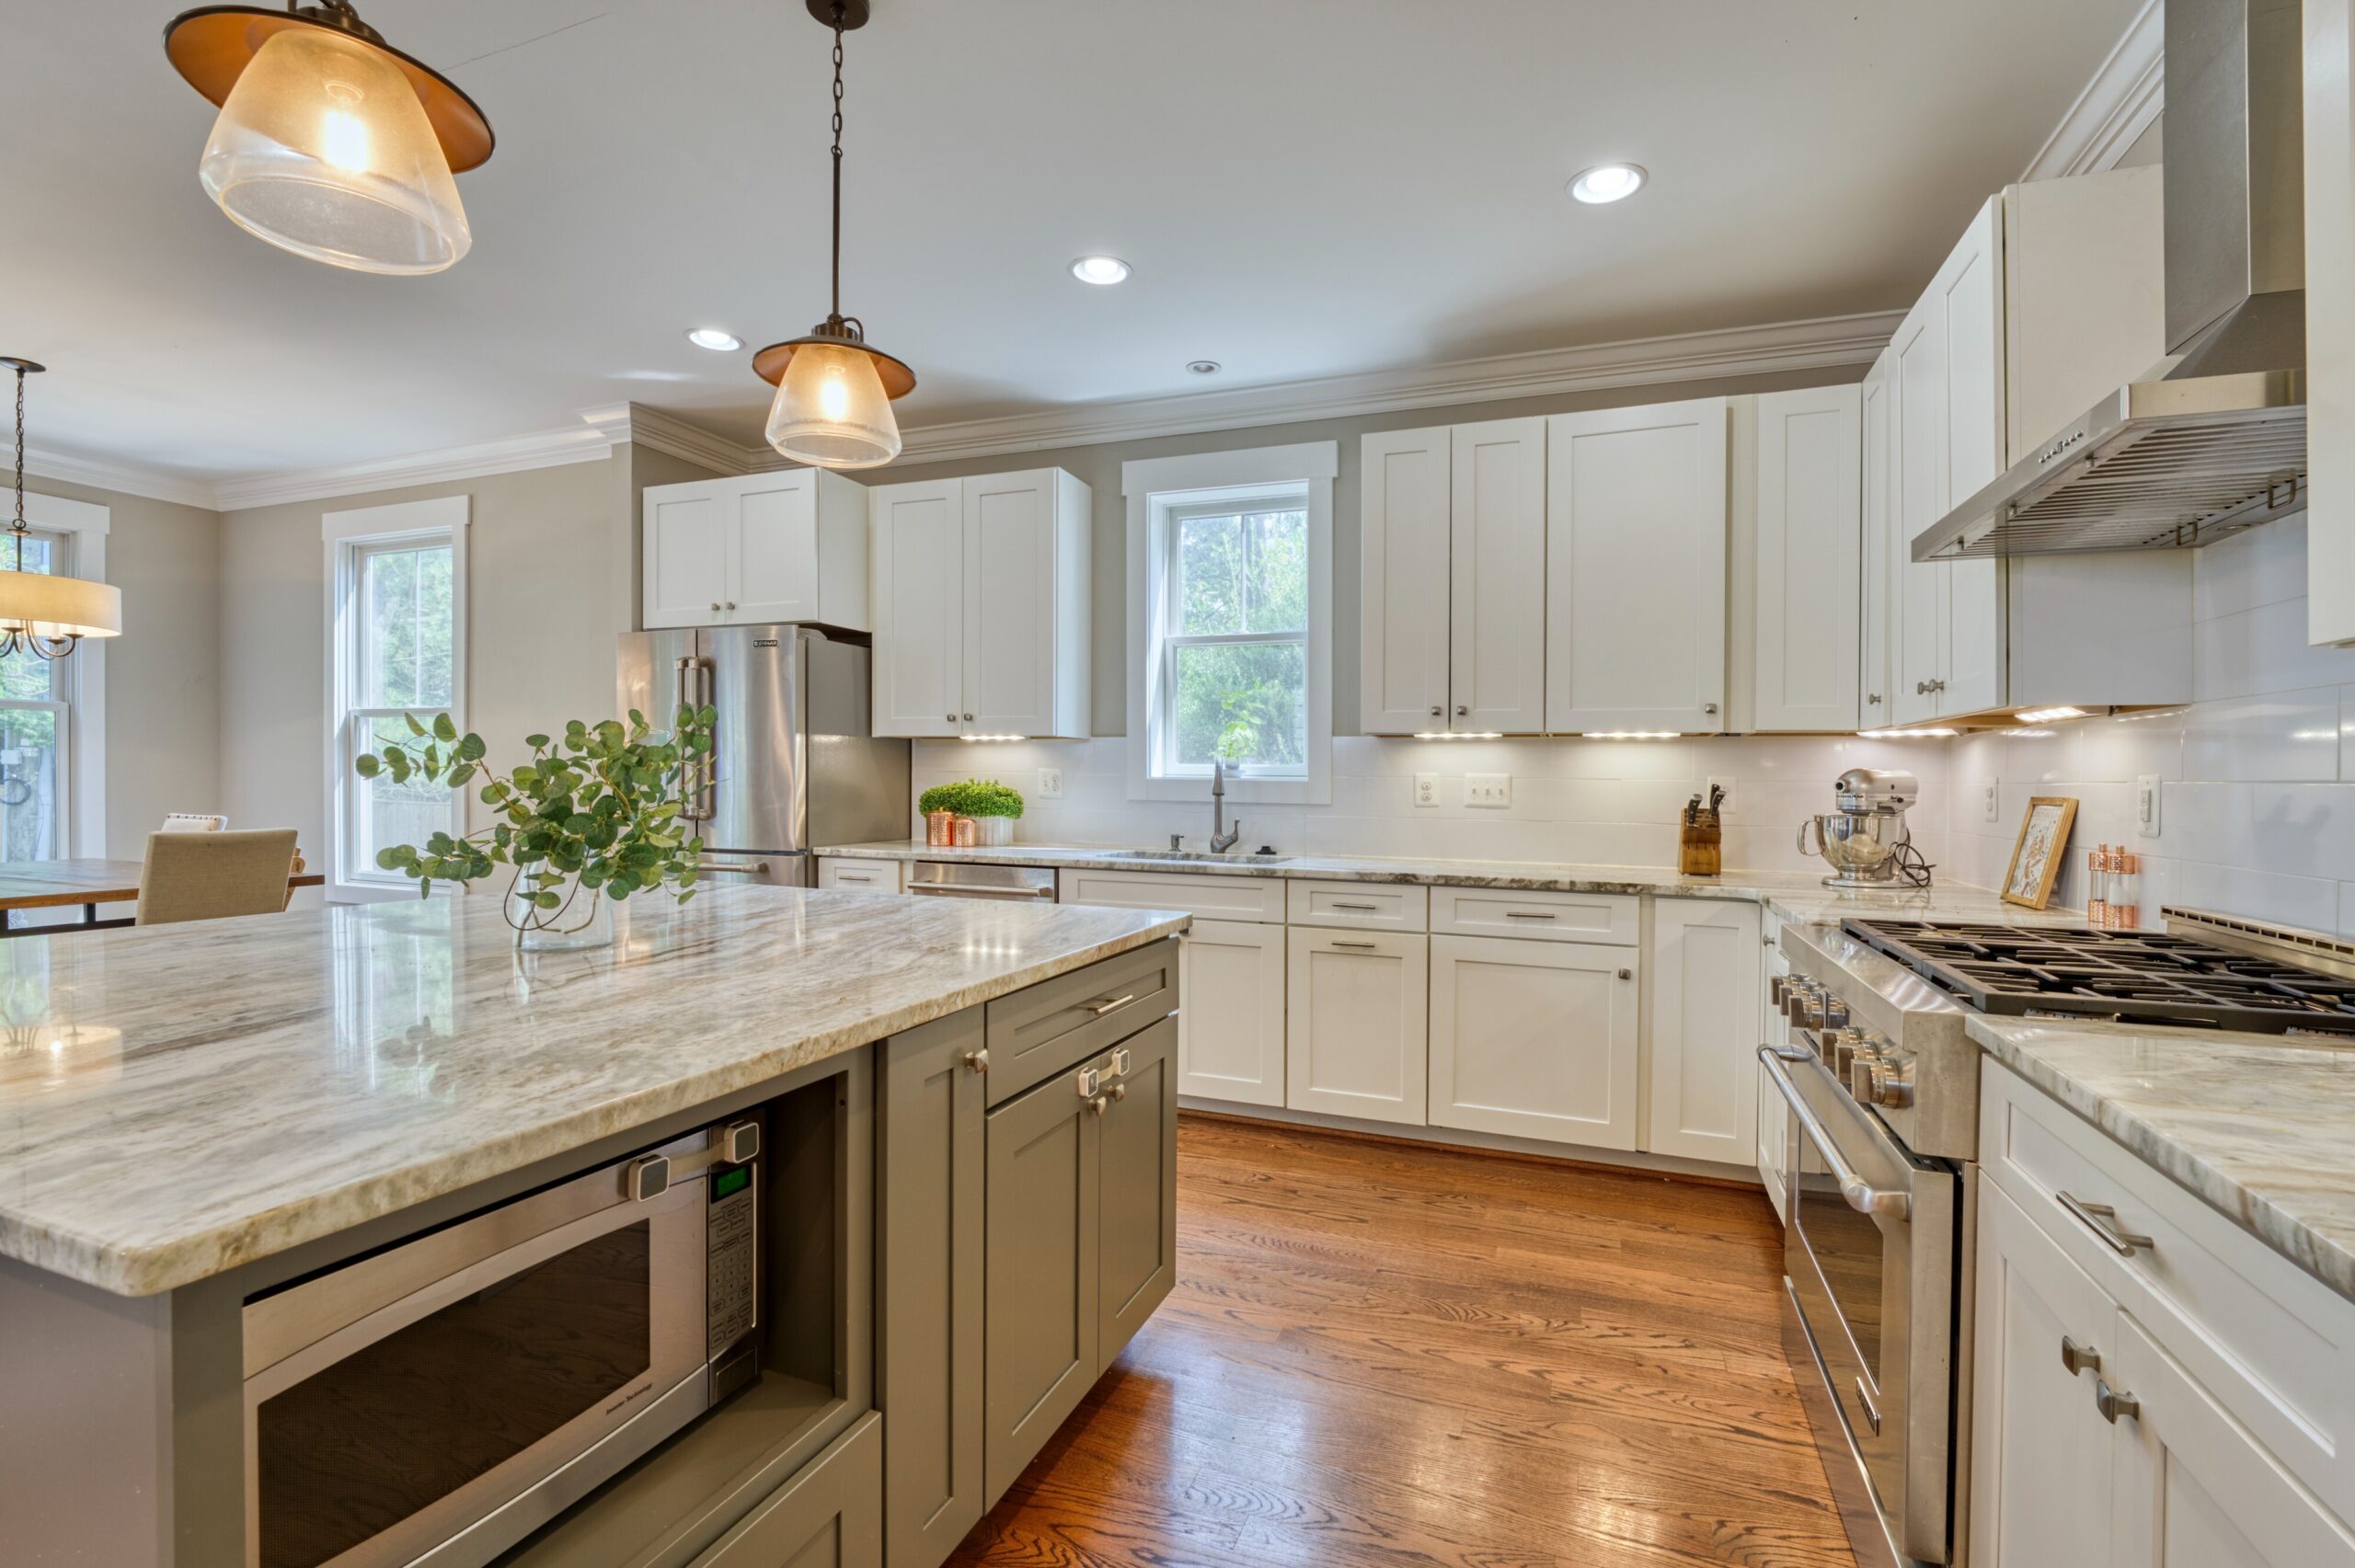 Professional interior photo of 505 N West St - showing the kitchen between the island and the range with modern cabinets and counters